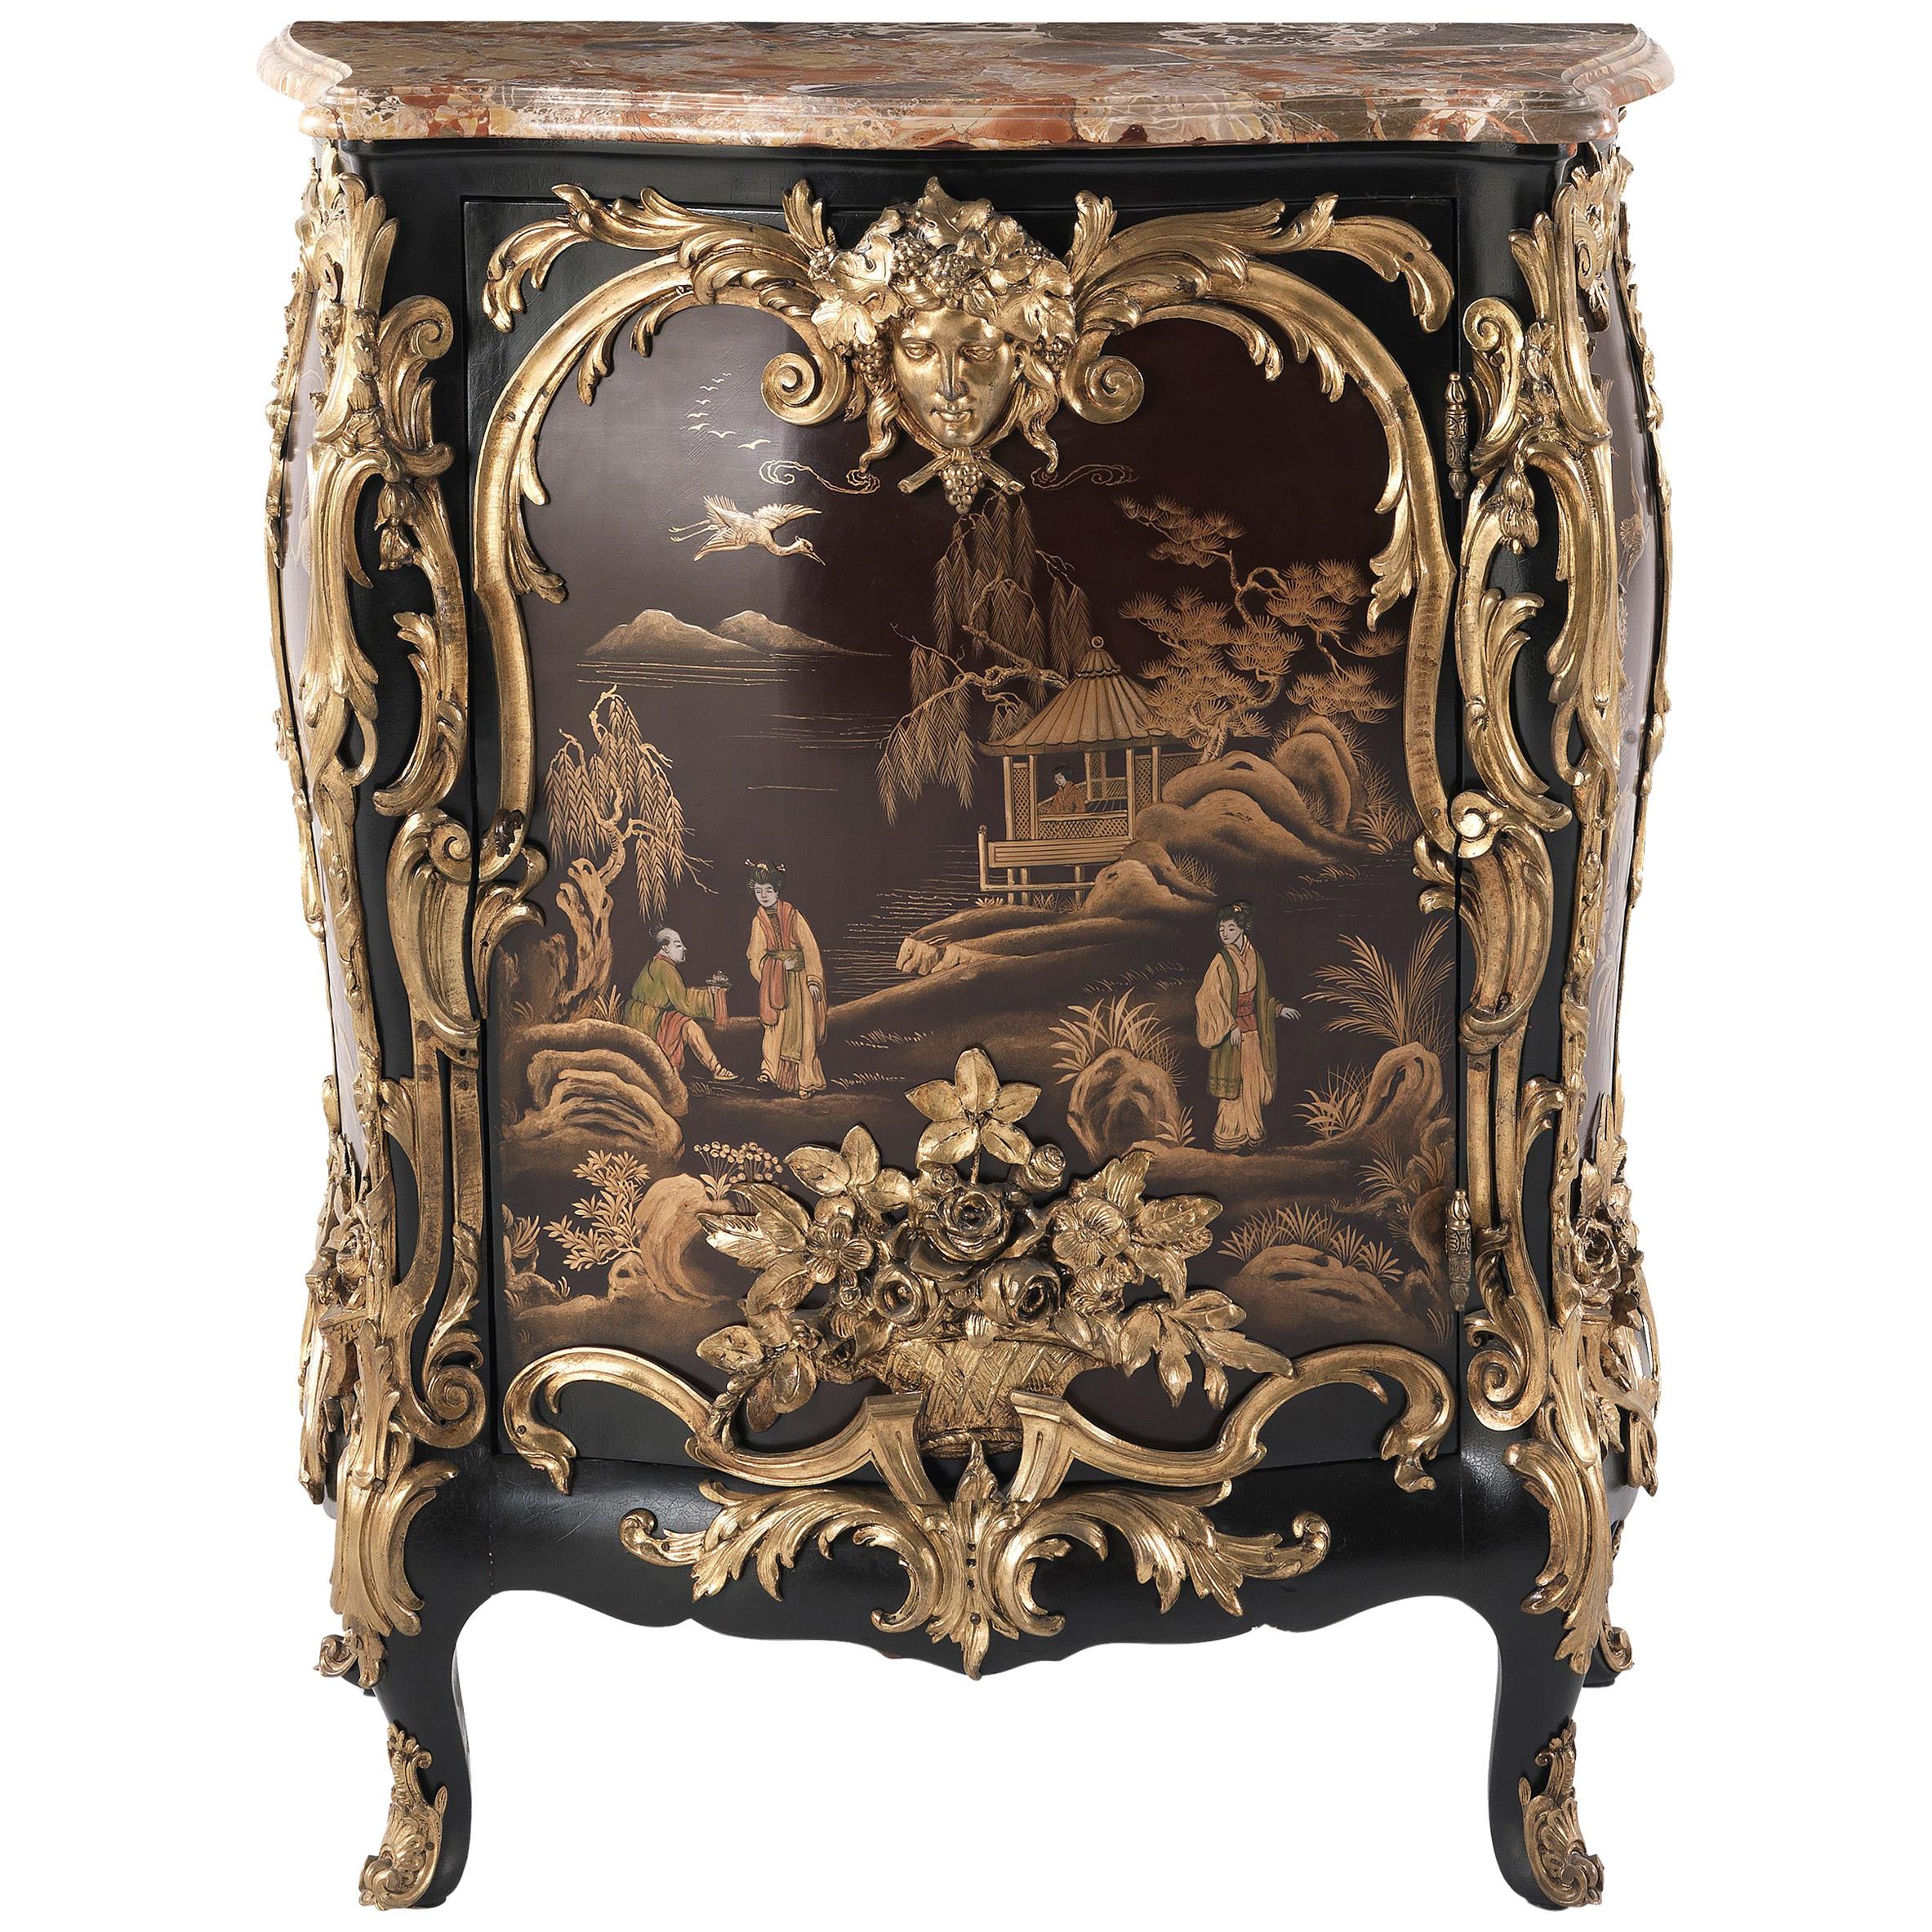 Jumbo Collection Antique Italian Ormolu-Mounted and Lacquered Cabinet